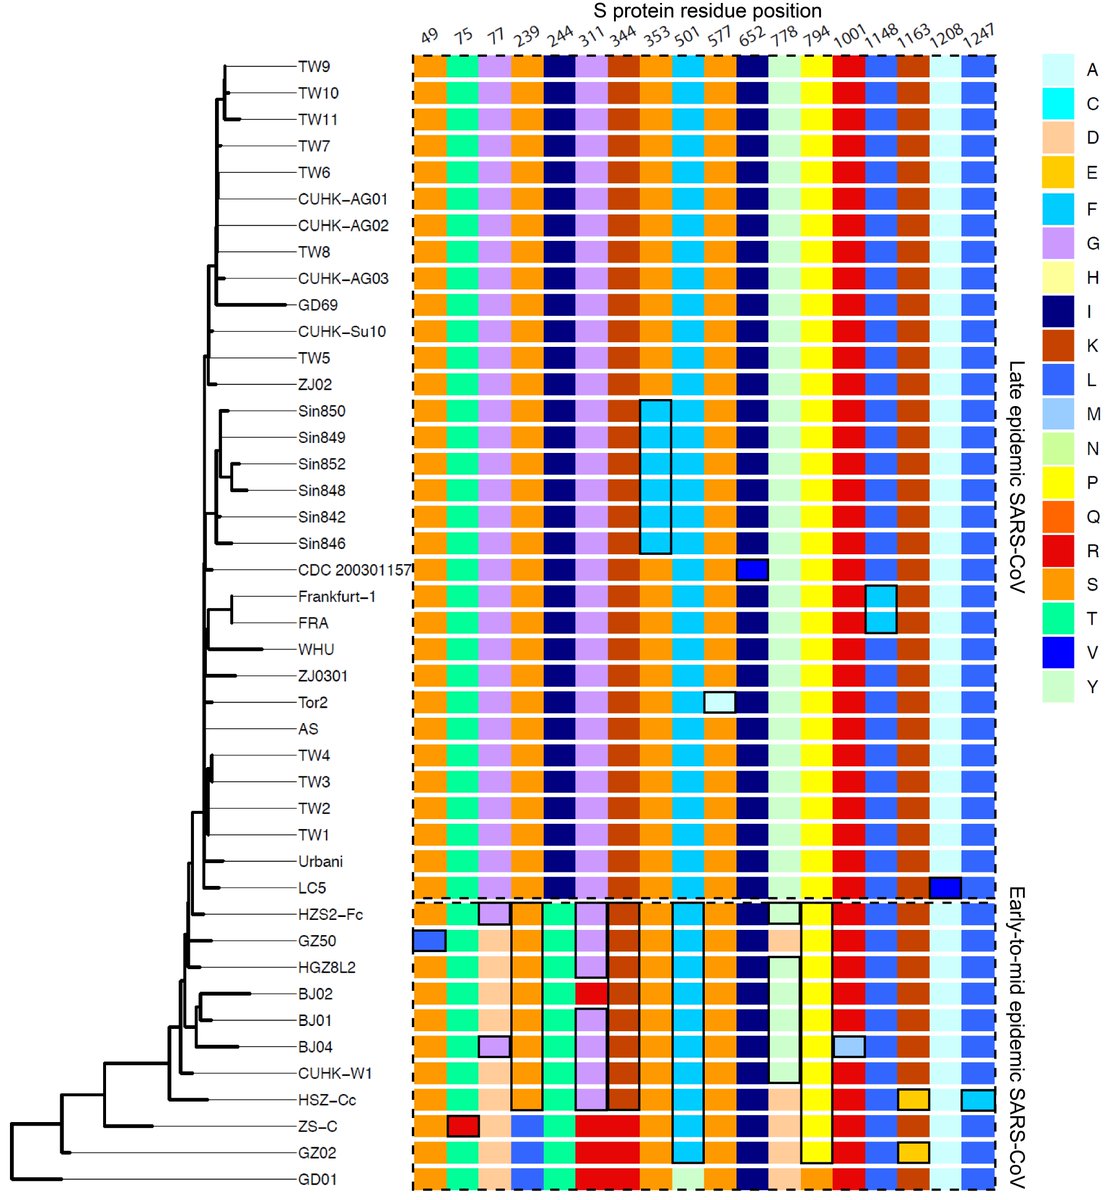 Focusing on the SARS-CoV spike, which binds to the host receptor (ACE2) to allow cell entry, you can see the numerous adaptive mutations that evolved and eventually dominated the late phase of the epidemic. The earliest isolate is at the bottom row.